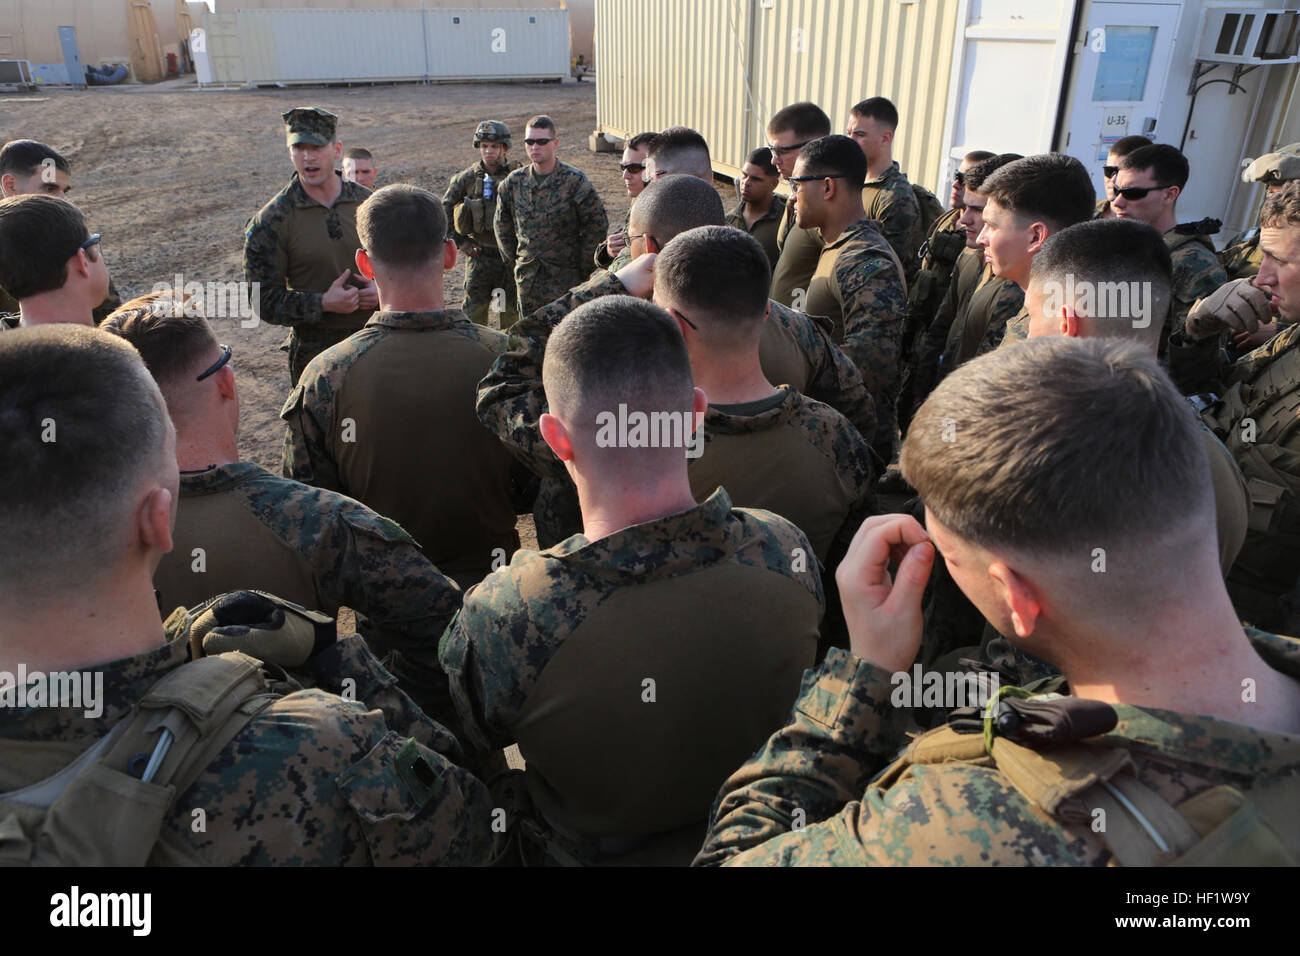 U.S. Marine Corps Capt. Thomas Wallin briefs his Marines and Sailors at Camp Lemonnier, Djibouti, Dec. 24, 2013. The Special-Purpose Marine Air-Ground Task Force Crisis Response recently repositioned from Moron Air Base, Spain. It trains for a variety of missions as directed by national and command authorities, but it remains focused on deterring crises throughout the U.S. Africa Command area of responsibility. Wallin is a ground combat element commander. (U.S. Marine Corps photo by Staff Sgt. Robert L. Fisher III.) U.S. Marines reposition from Spain 131224-M-HF911-001 Stock Photo